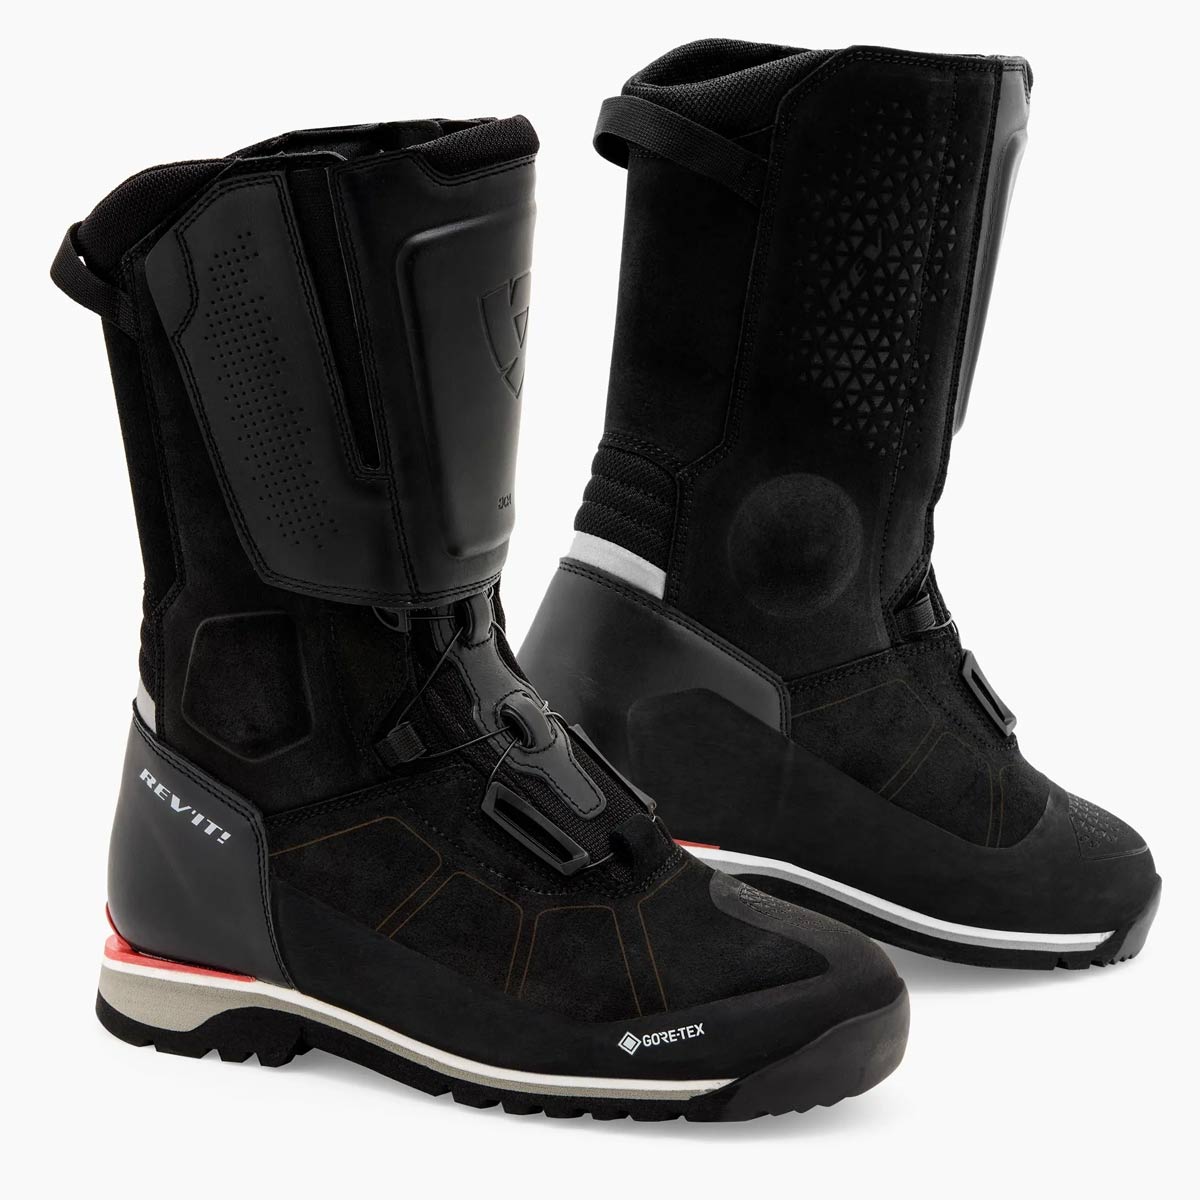 REV'IT! DISCOVERY GTX Boots